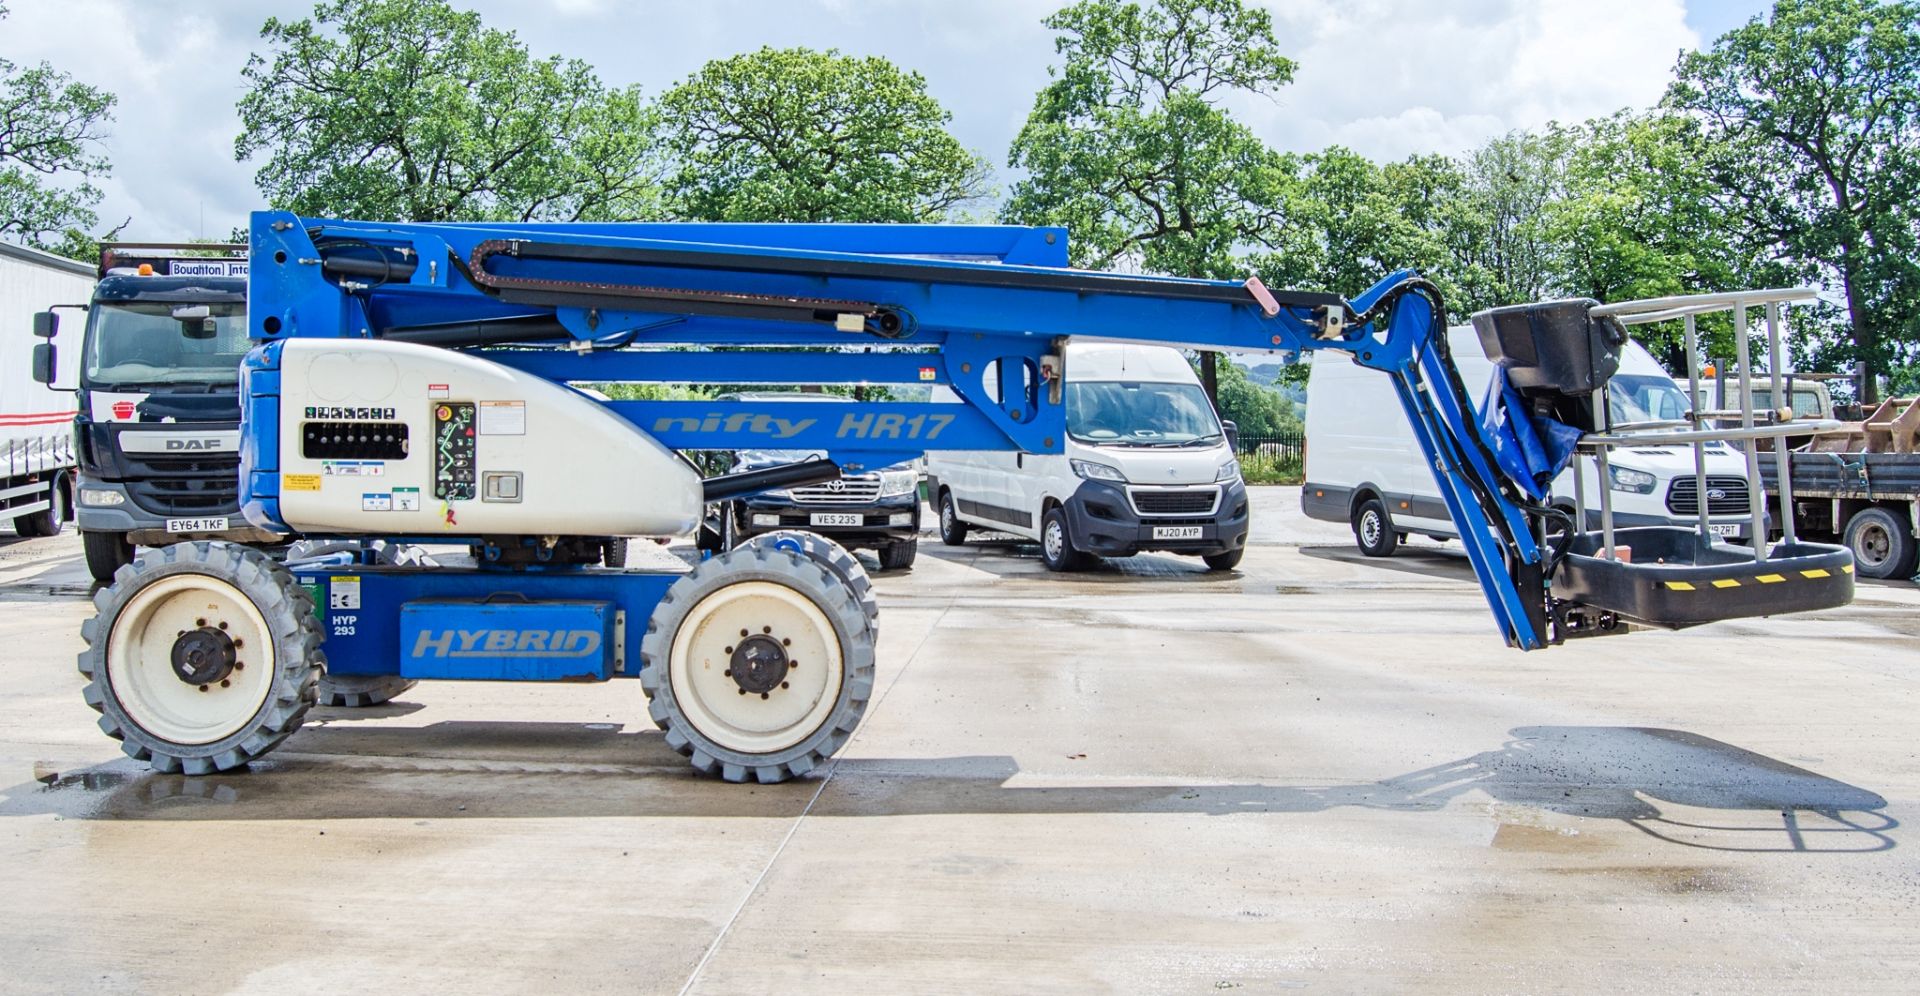 Nifty HR17 Hybrid battery electric/diesel 4WD articulated boom access platform Year: 2014 S/N: - Image 8 of 18